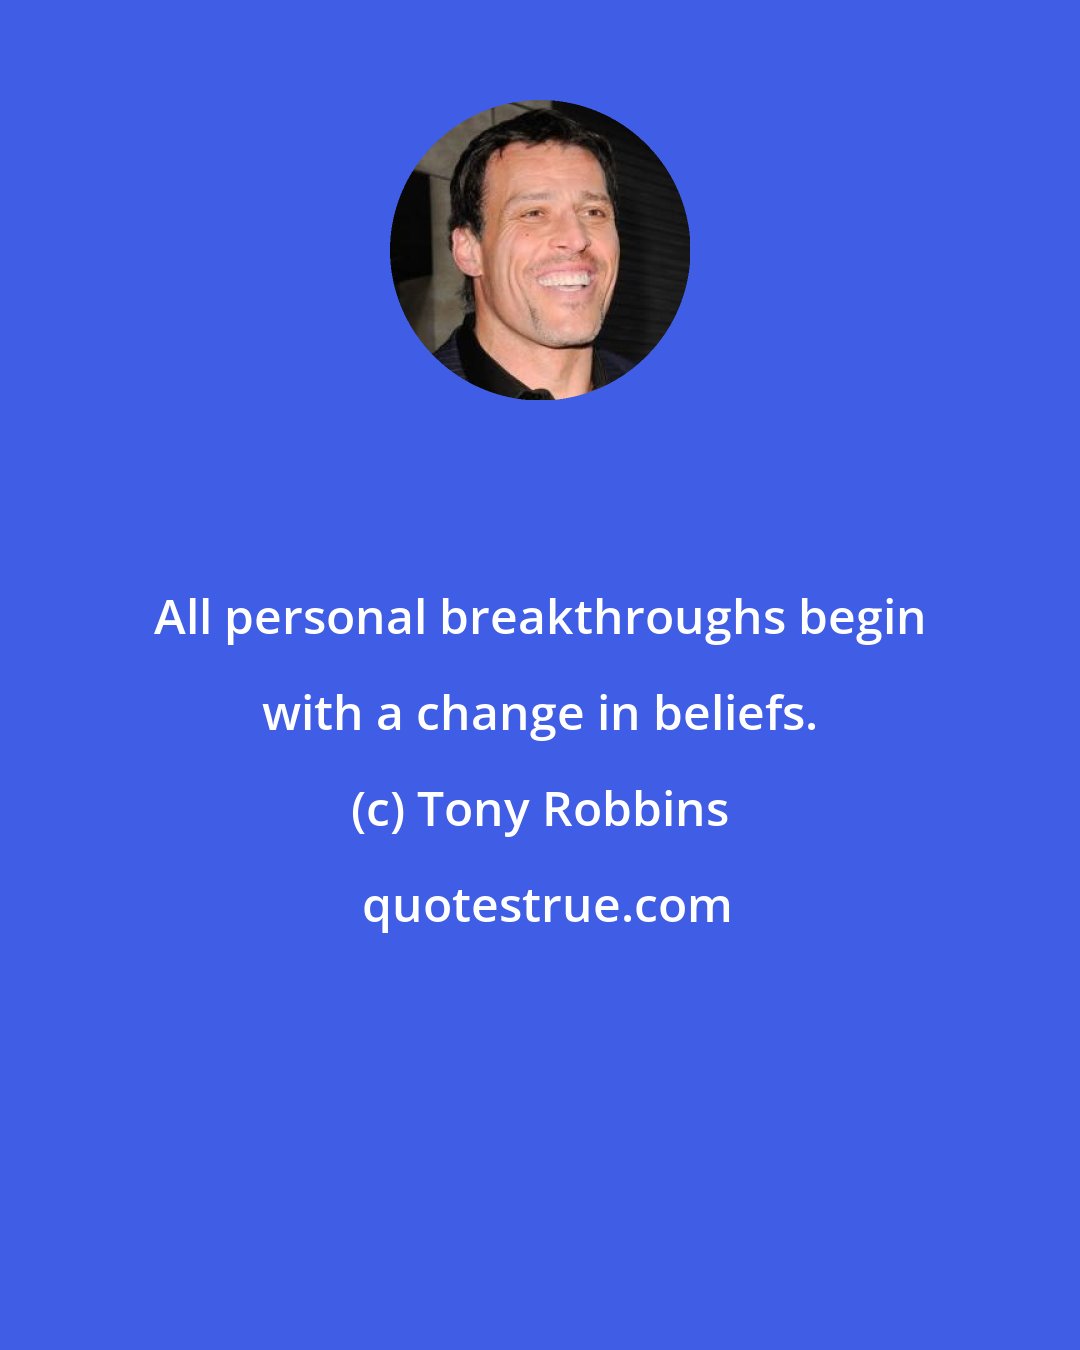 Tony Robbins: All personal breakthroughs begin with a change in beliefs.